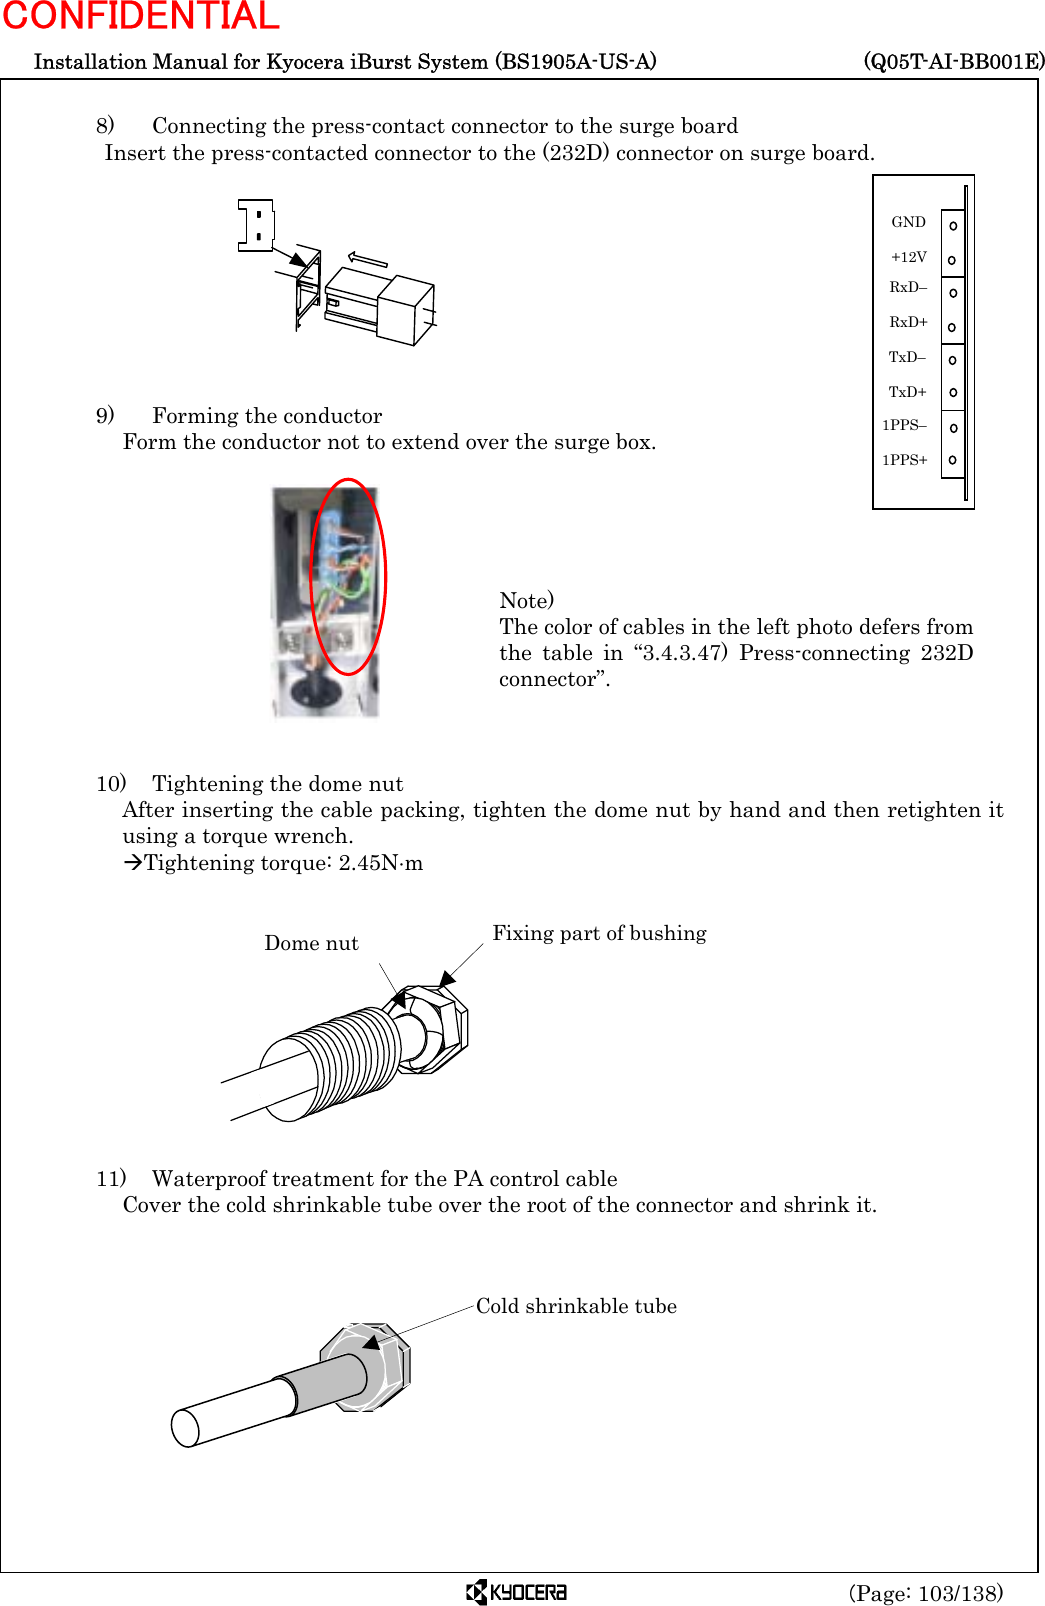  Installation Manual for Kyocera iBurst System (BS1905A-US-A)     (Q05T-AI-BB001E) (Page: 103/138) CONFIDENTIAL  8)   Connecting the press-contact connector to the surge board Insert the press-contacted connector to the (232D) connector on surge board.          9)    Forming the conductor Form the conductor not to extend over the surge box.             10)    Tightening the dome nut After inserting the cable packing, tighten the dome nut by hand and then retighten it using a torque wrench. ÆTightening torque: 2.45N⋅m            11)    Waterproof treatment for the PA control cable Cover the cold shrinkable tube over the root of the connector and shrink it.           Dome nut  Fixing part of bushing Cold shrinkable tube Note) The color of cables in the left photo defers fromthe table in “3.4.3.47) Press-connecting 232Dconnector”. 1PPS–  1PPS+ GND  +12V TxD–  TxD+ RxD–  RxD+ 